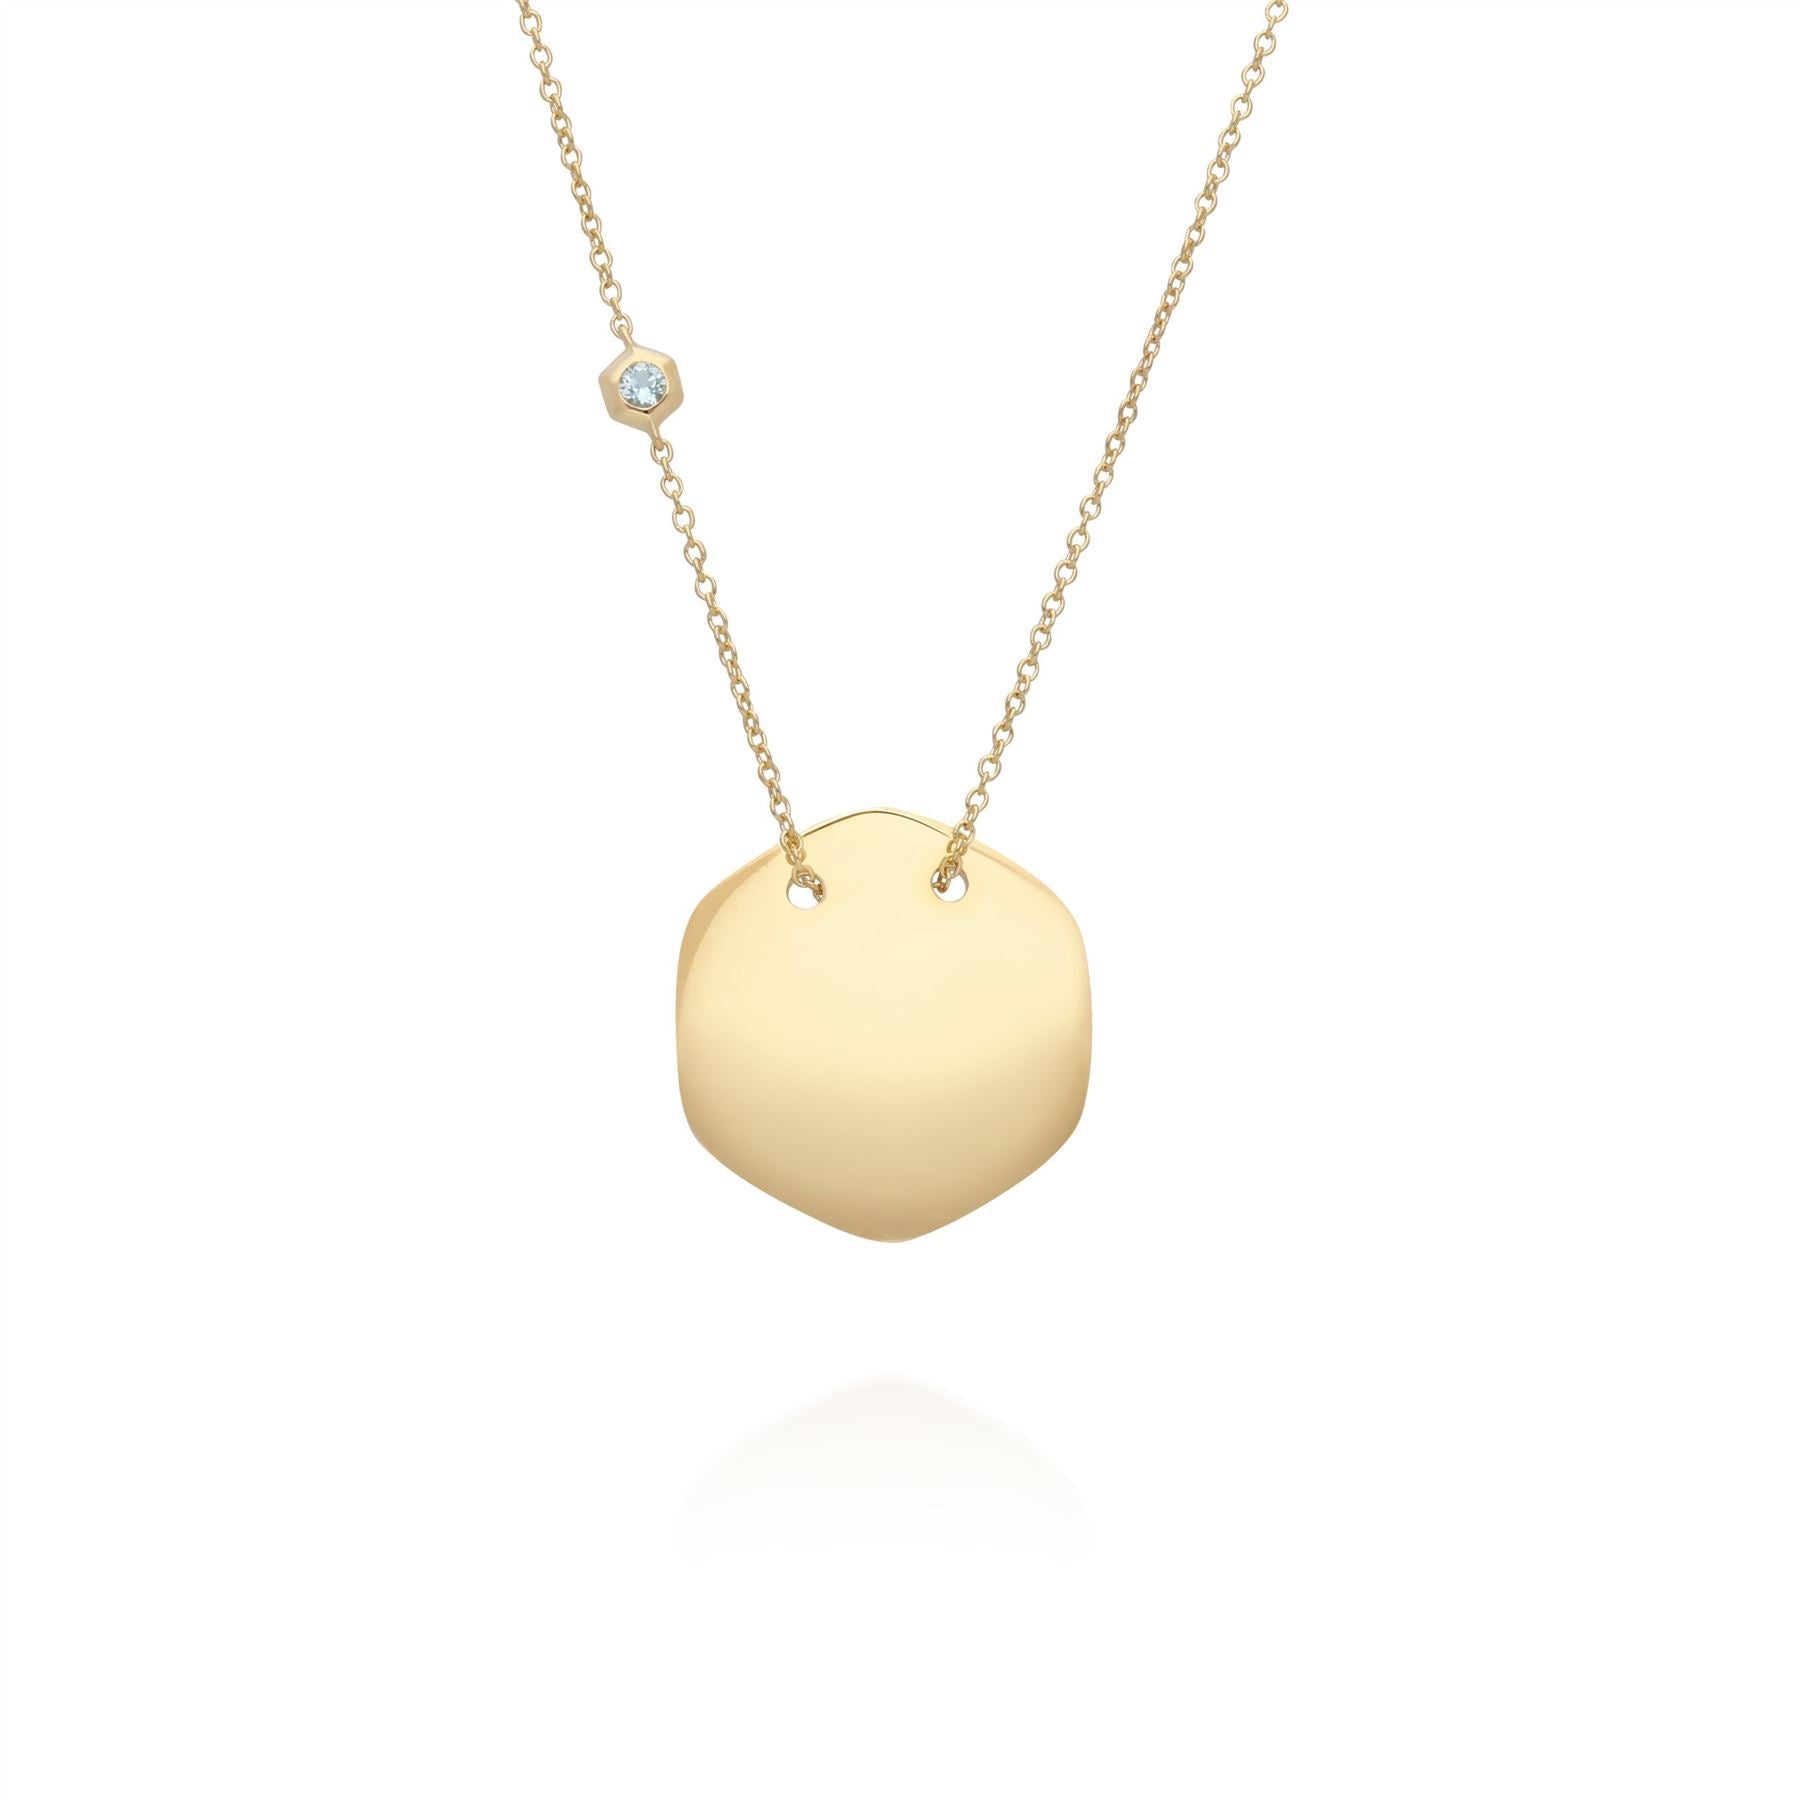 Aquamarine Engravable Necklace in Yellow Gold Plated Sterling Silver